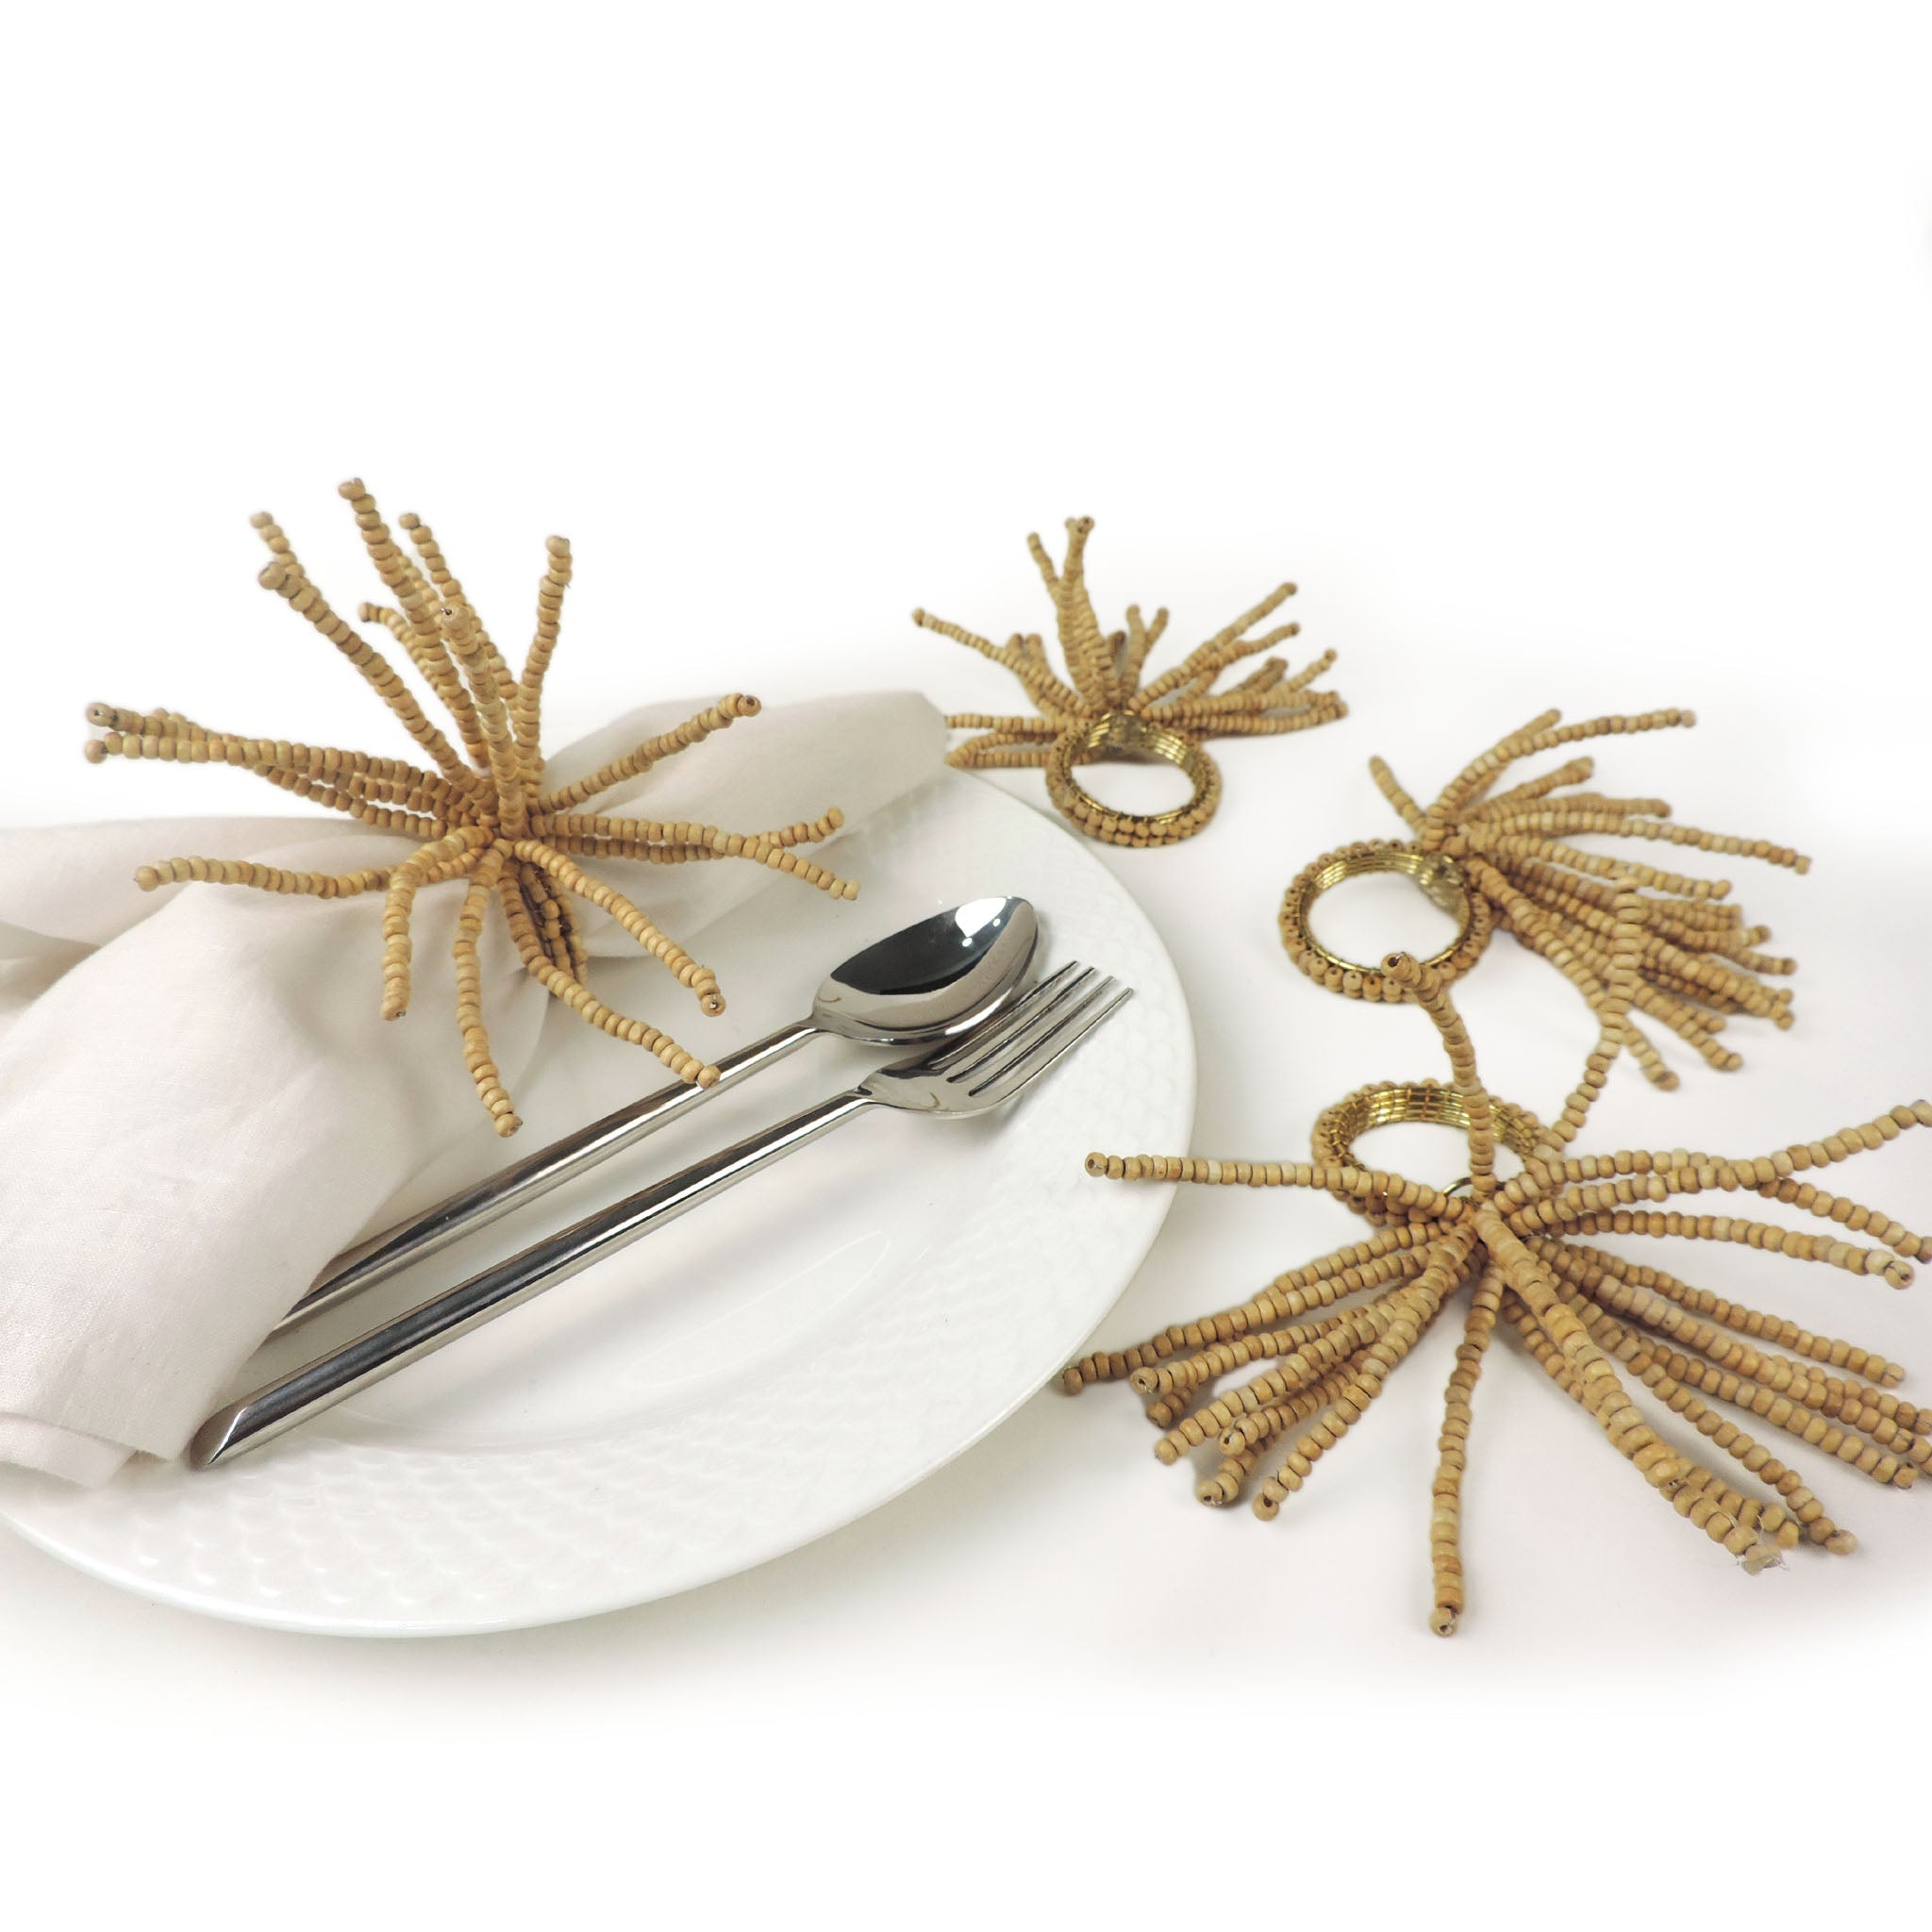 II Pesce Glass Bead Table Setting for 4 - Embroidered Placemats, Napkin Rings & Table Runner in Natural White